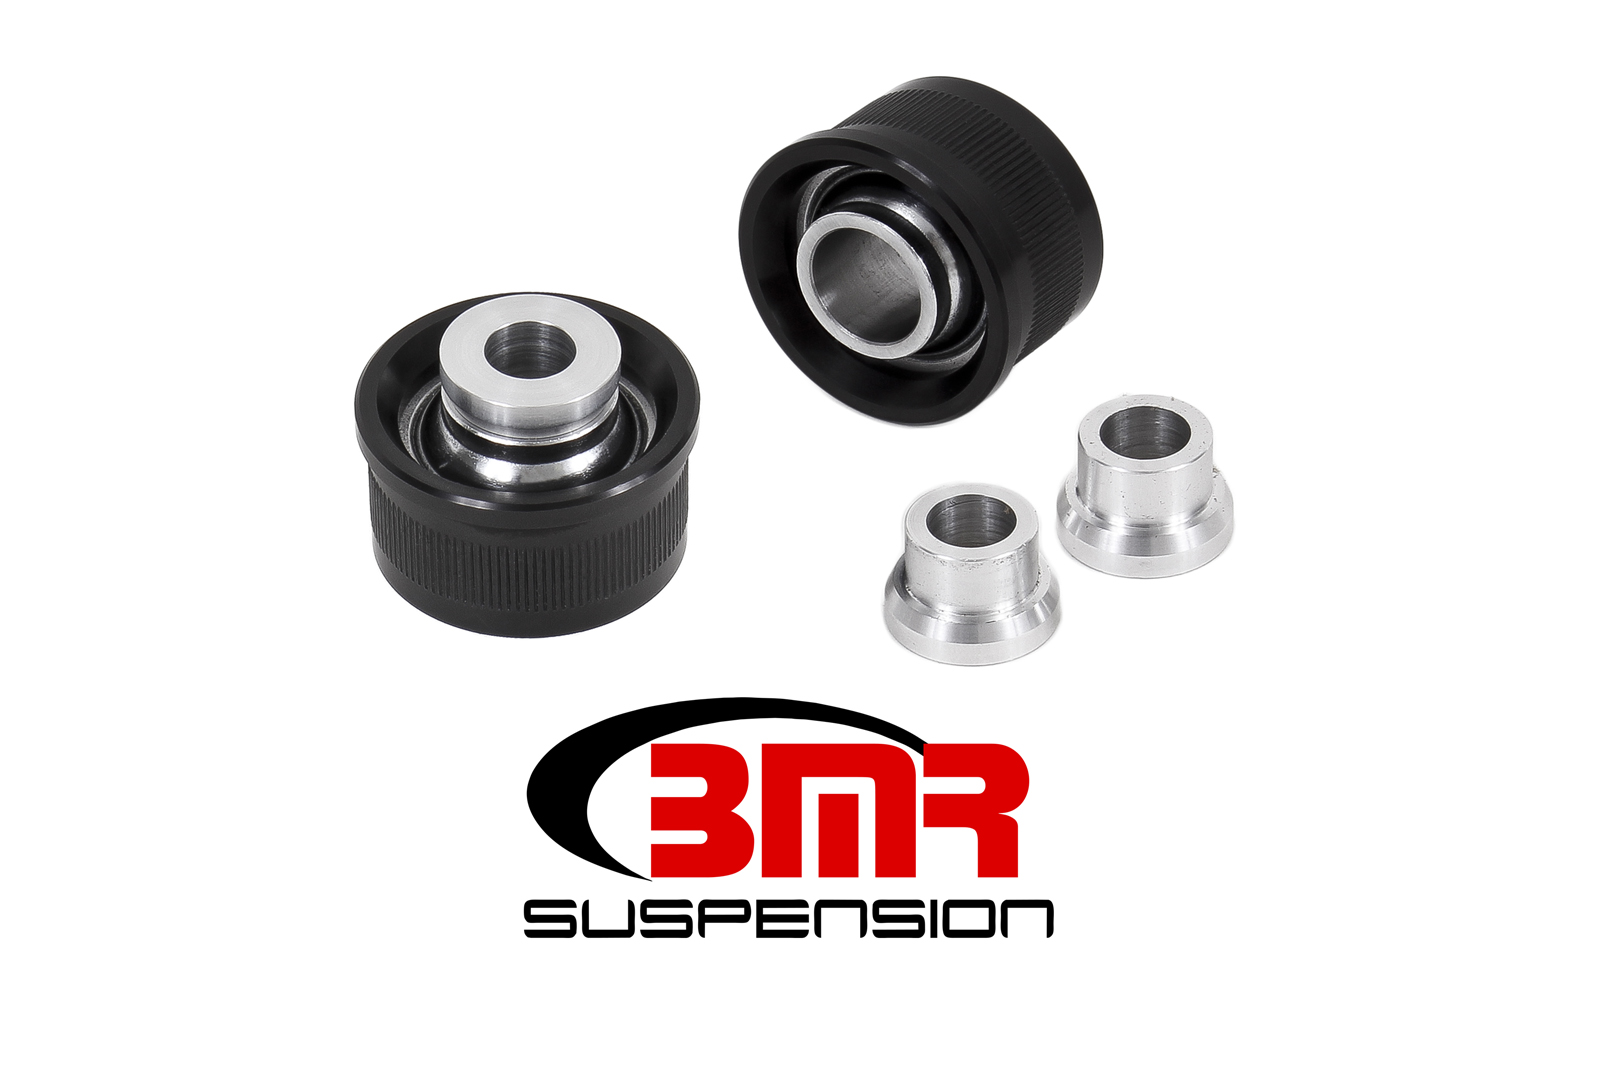 Bearing Kit, Rear Upper Trailing Arms, Outer, Fits 2016-Newer Chevrolet Camaro , BMR Suspension - BK065